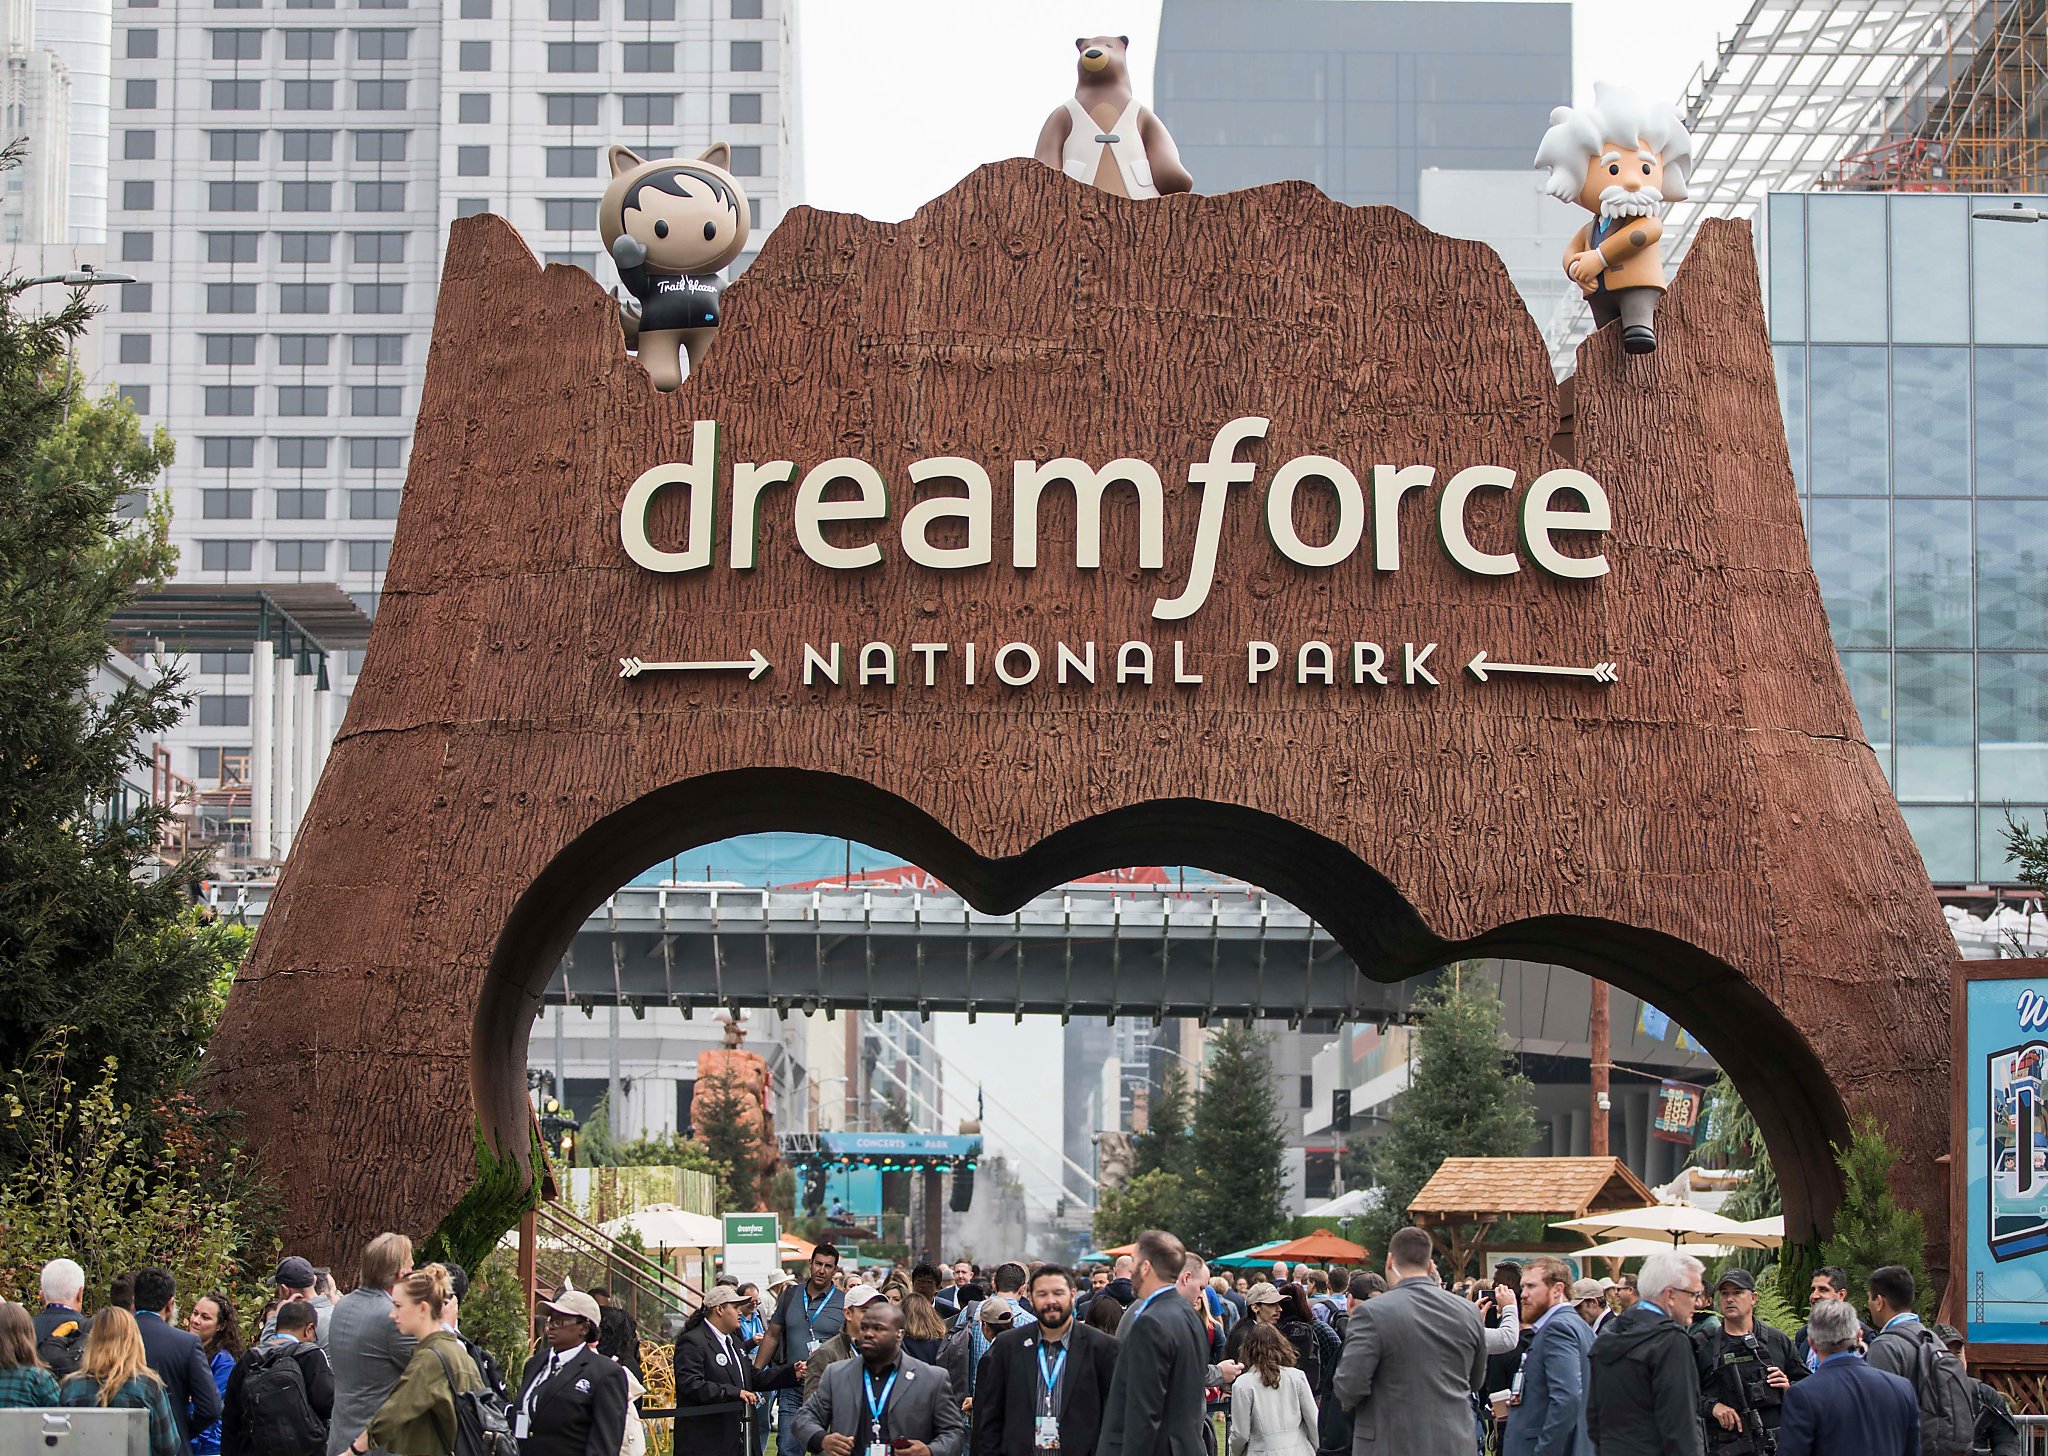 Dreamforce is coming, and that means road closures in SF